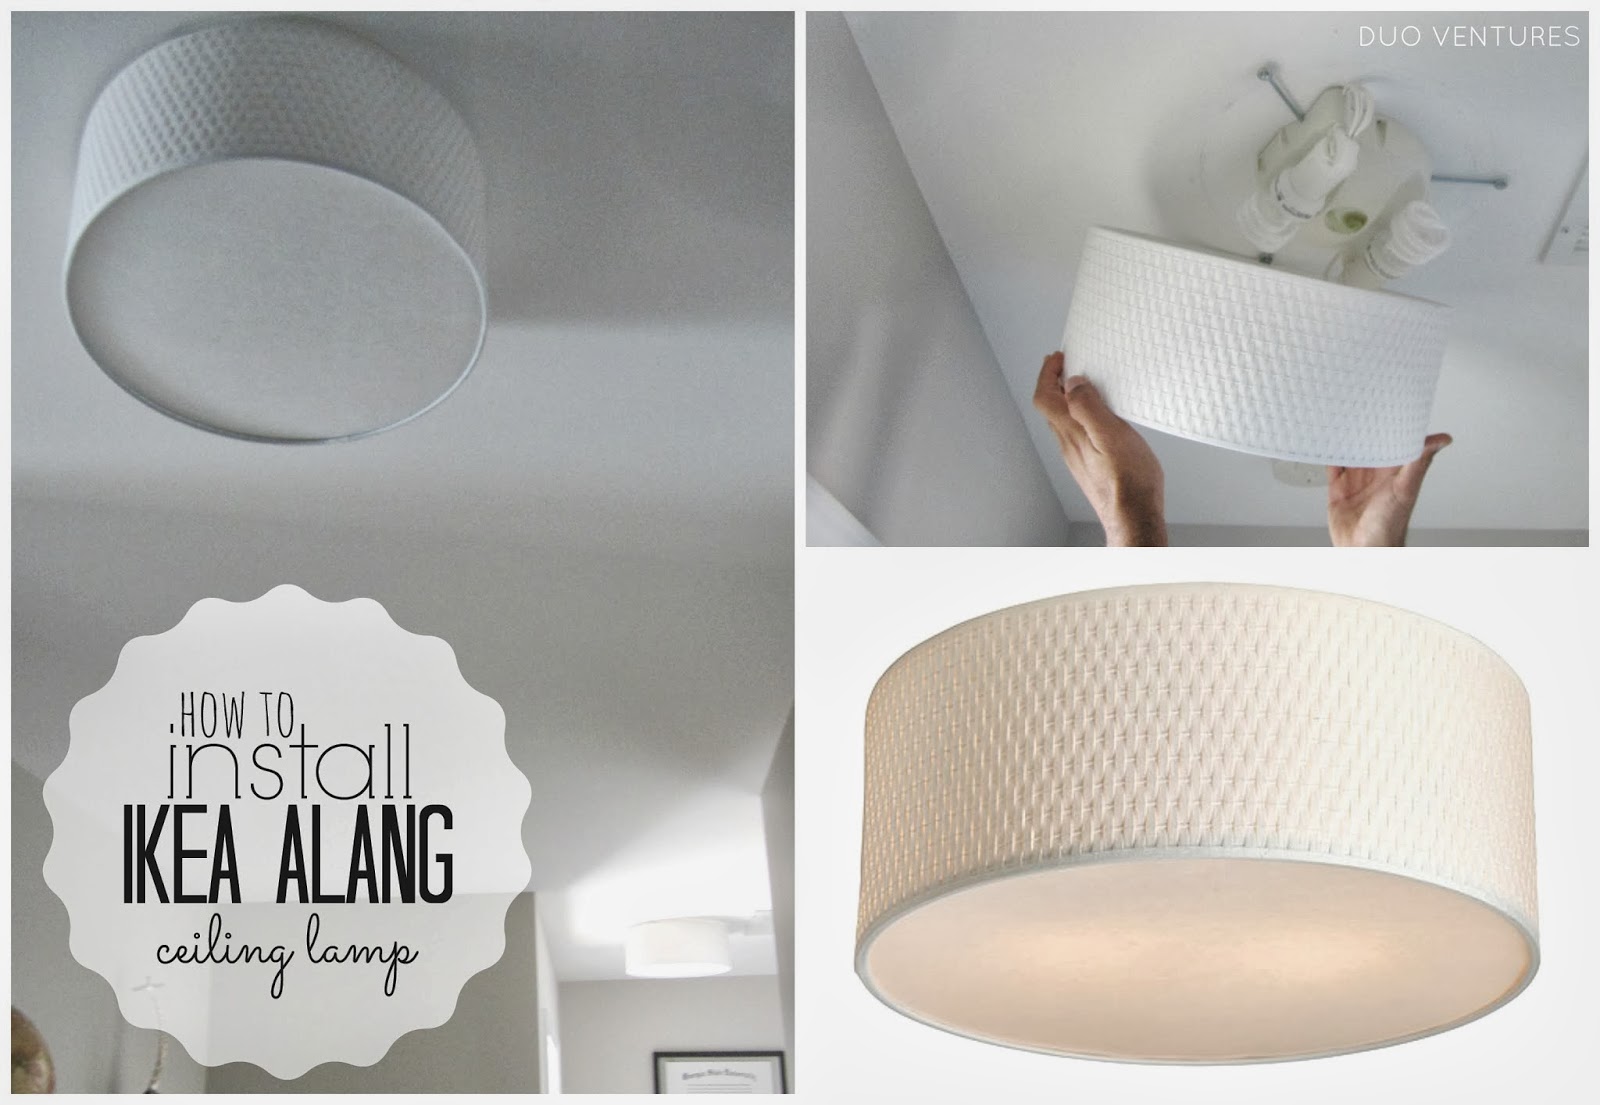 IKEA ALANG Collage.jpg  by BudgetGeneral